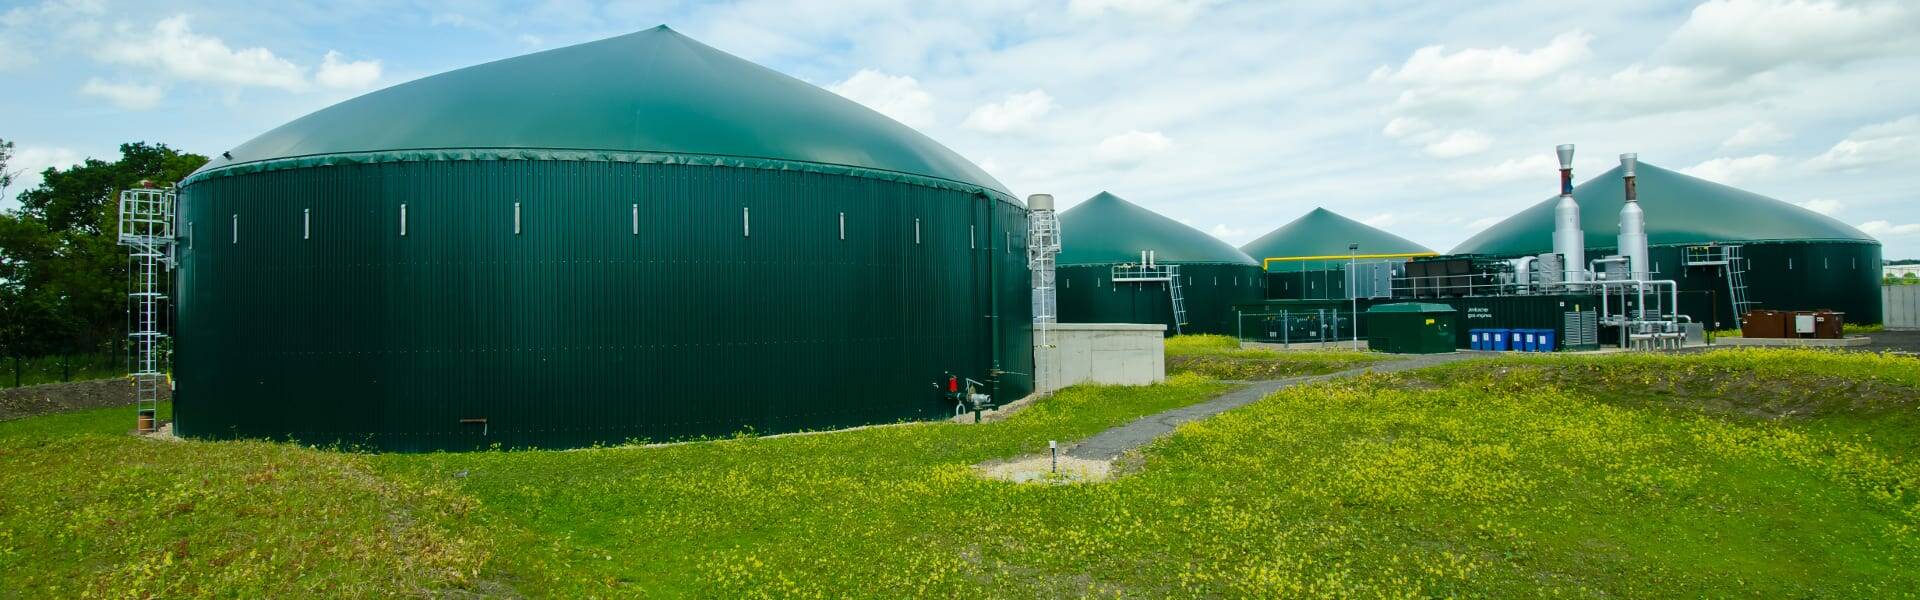 Biogas producer reveals plans for 25 new plants with CCS